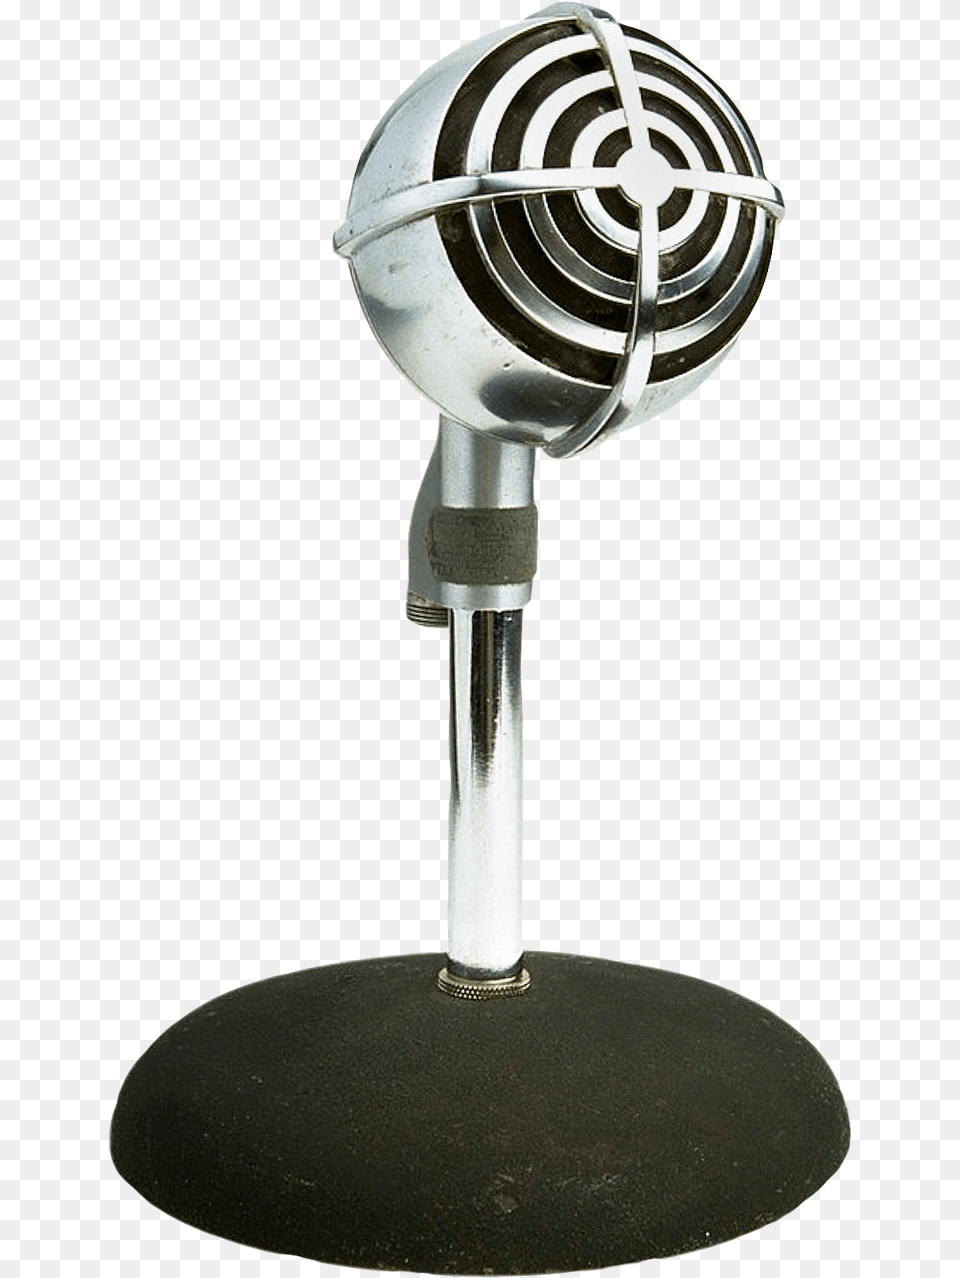 Retro Style Microphone Pngpix Microphone, Electrical Device, Mace Club, Weapon Png